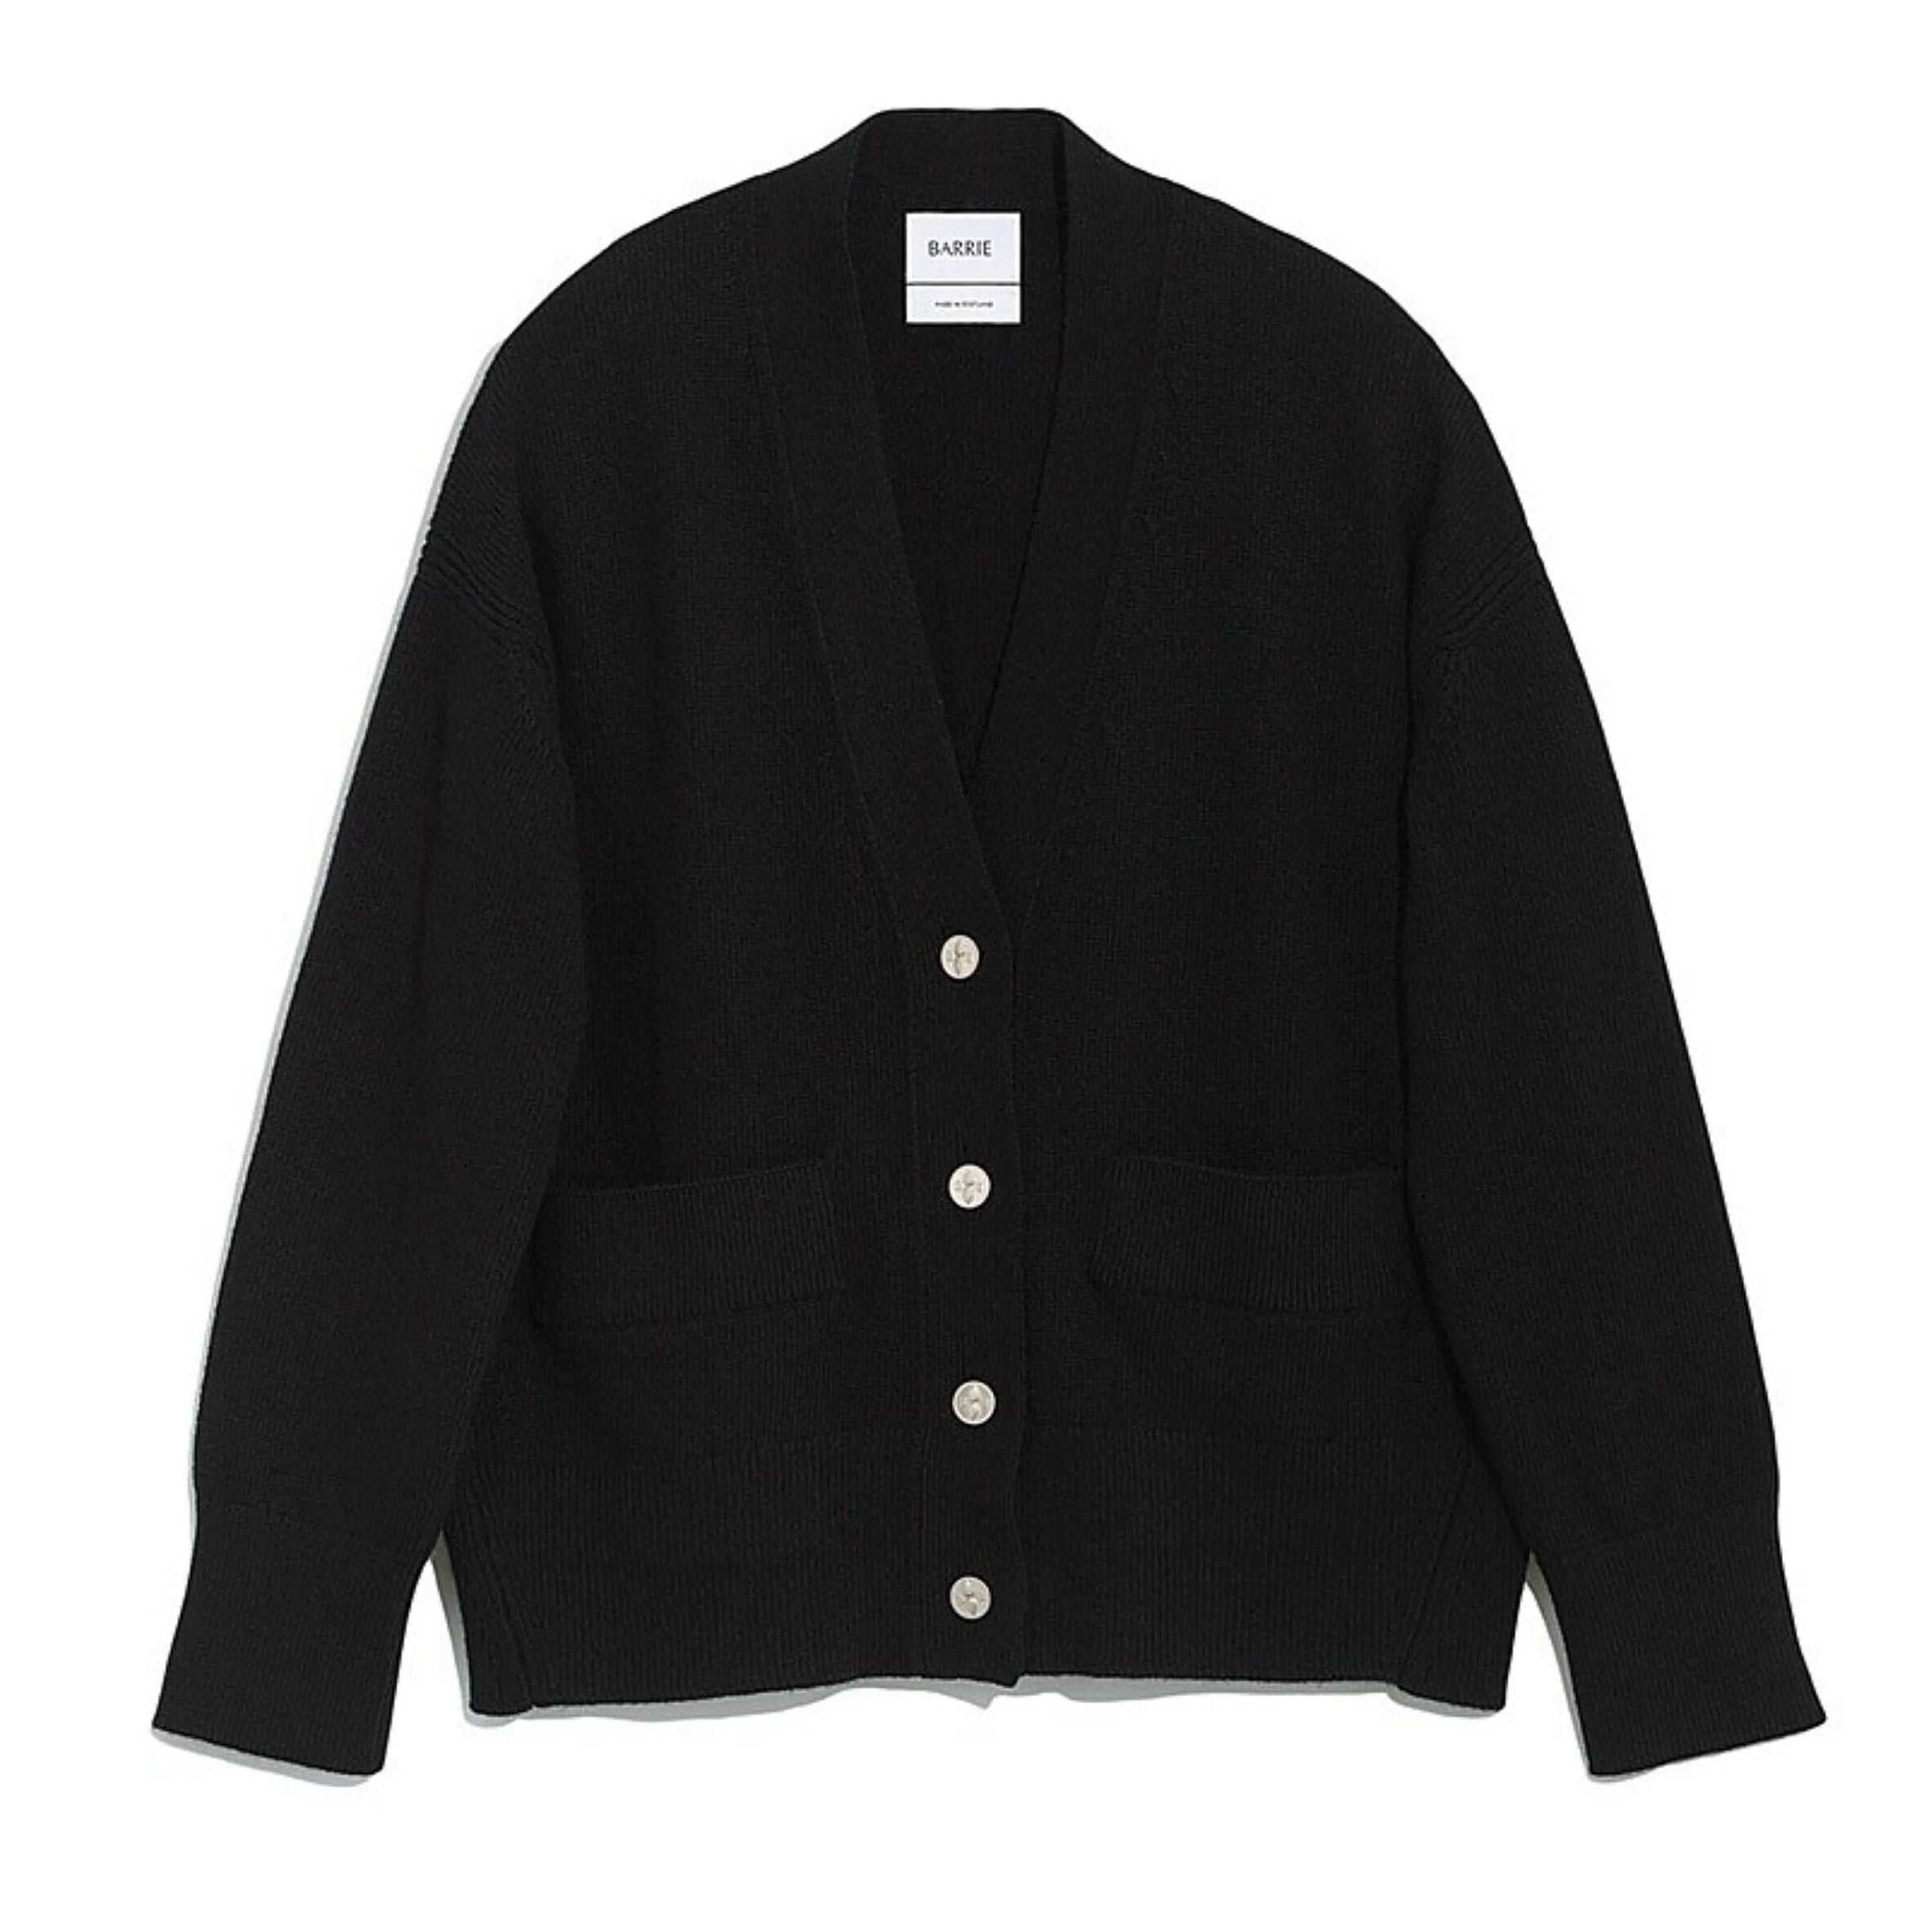 Iconic cashmere cardigan – Barrie.com